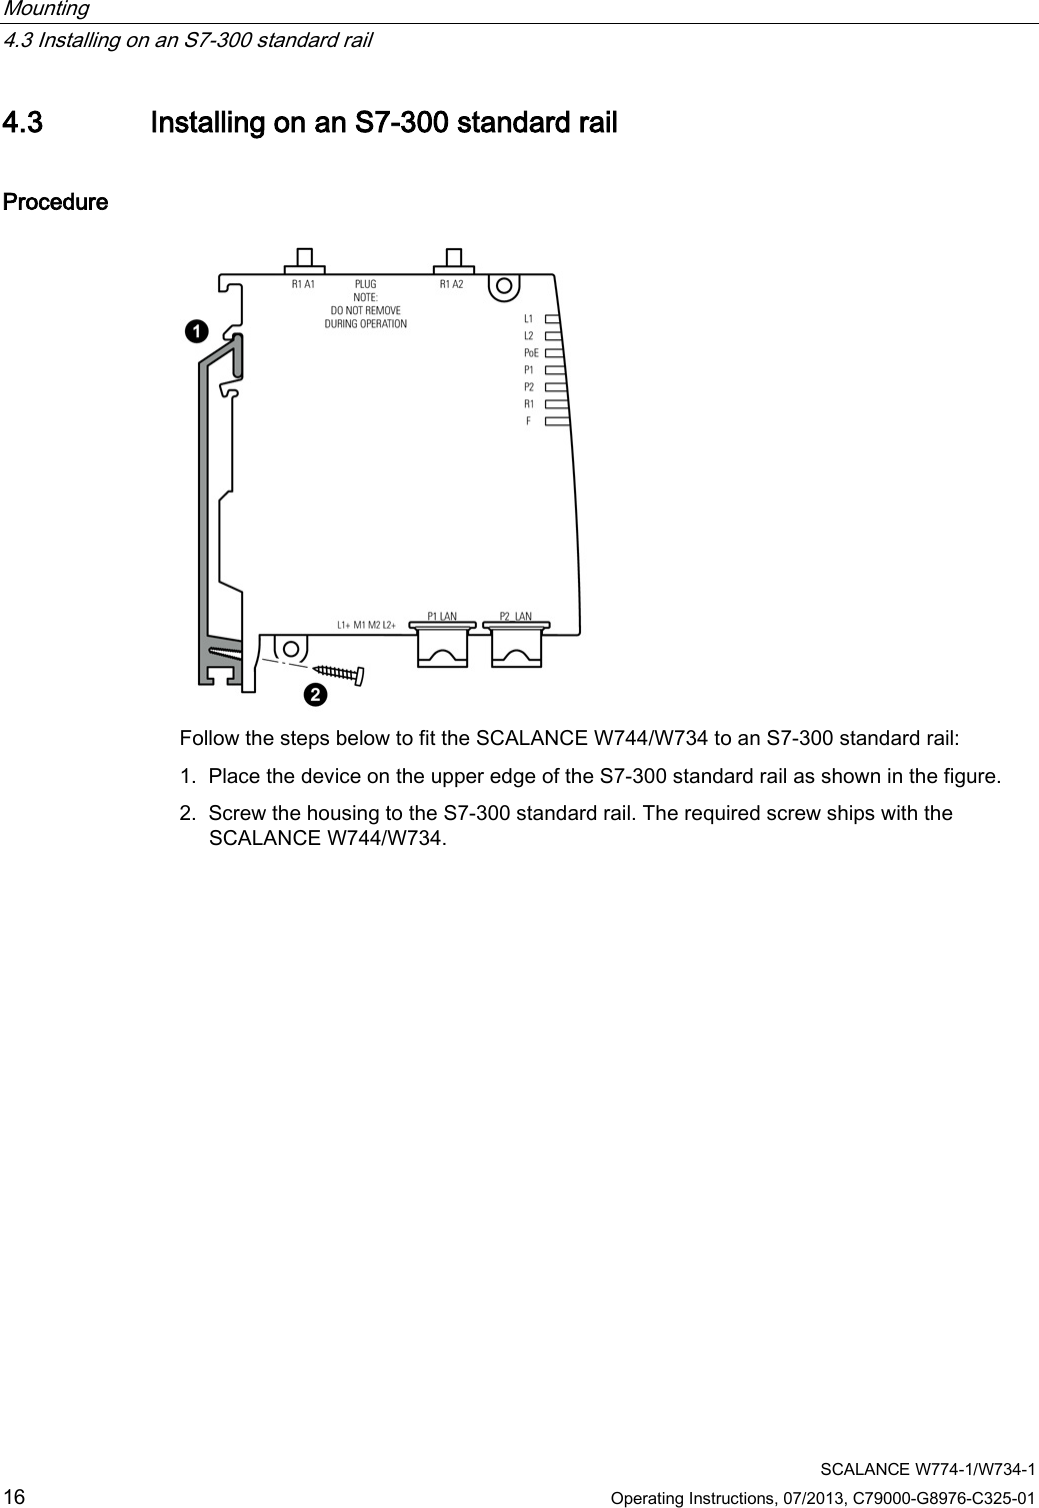 Mounting   4.3 Installing on an S7-300 standard rail  SCALANCE W774-1/W734-1 16 Operating Instructions, 07/2013, C79000-G8976-C325-01 4.3 Installing on an S7-300 standard rail Procedure  Follow the steps below to fit the SCALANCE W744/W734 to an S7-300 standard rail: 1. Place the device on the upper edge of the S7-300 standard rail as shown in the figure. 2. Screw the housing to the S7-300 standard rail. The required screw ships with the SCALANCE W744/W734. 